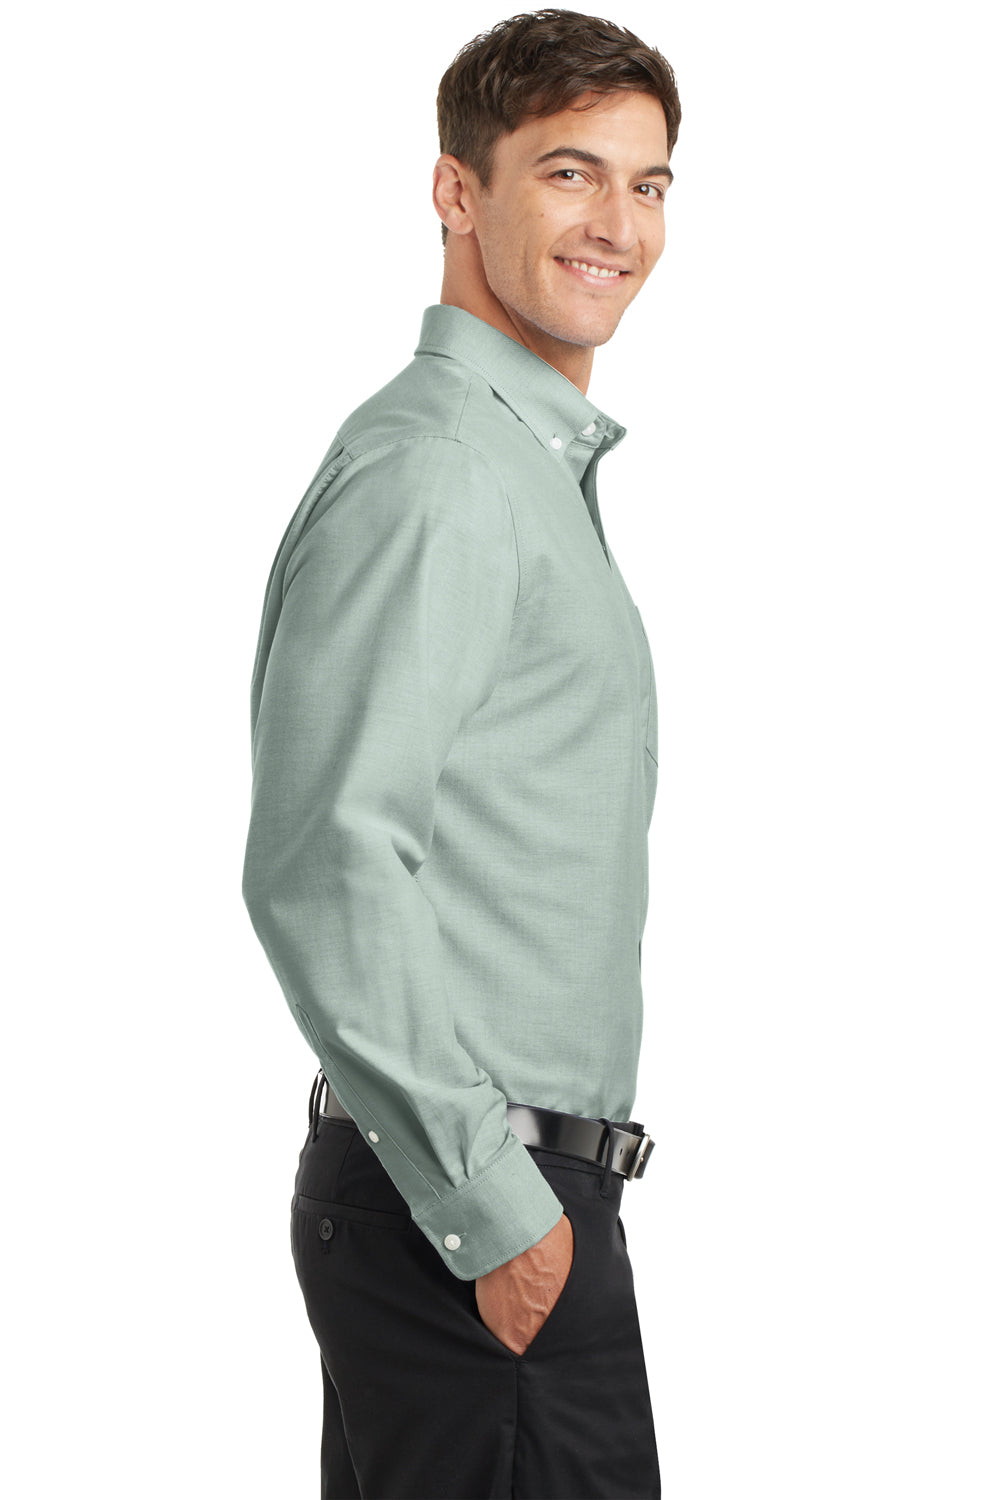 Port Authority S658 Mens SuperPro Oxford Wrinkle Resistant Long Sleeve Button Down Shirt w/ Pocket Green Side